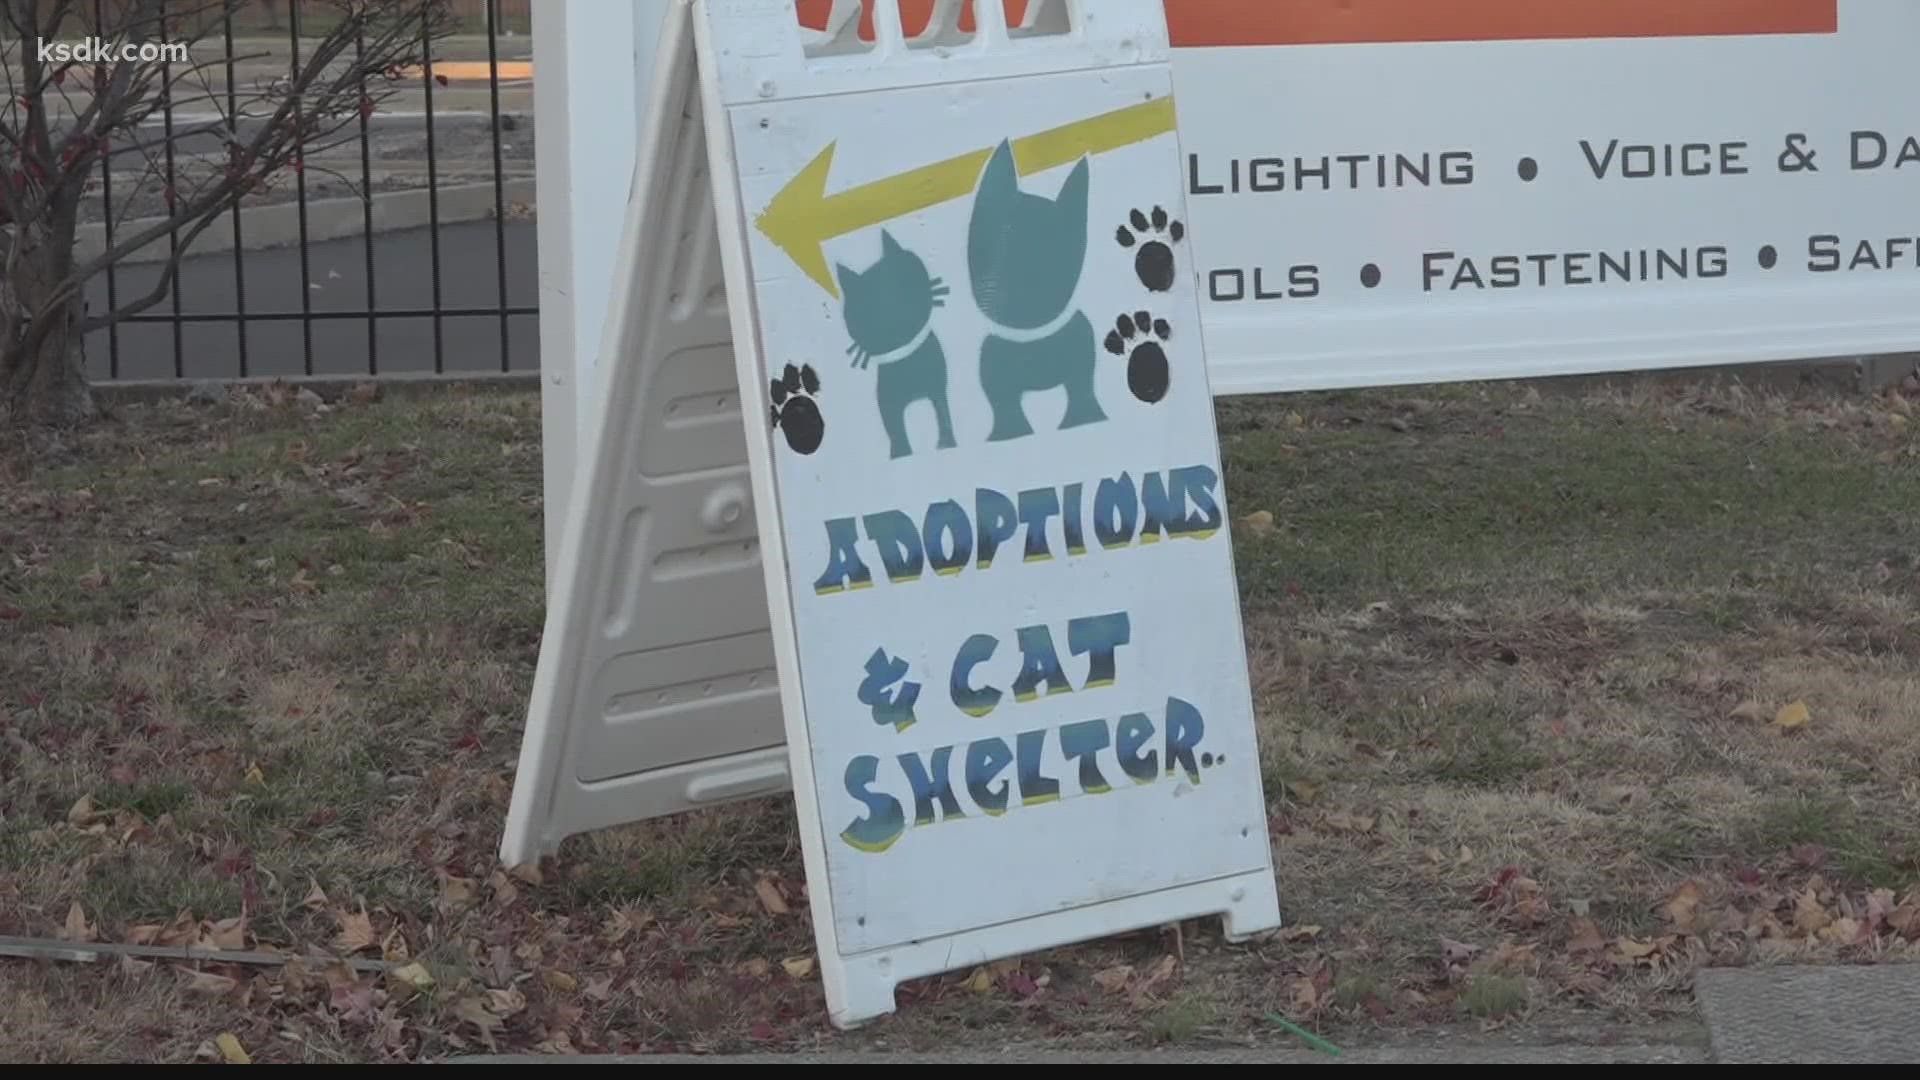 CARE STL is in need of supplies and extra help after authorities brought dozens of cats from a man's home